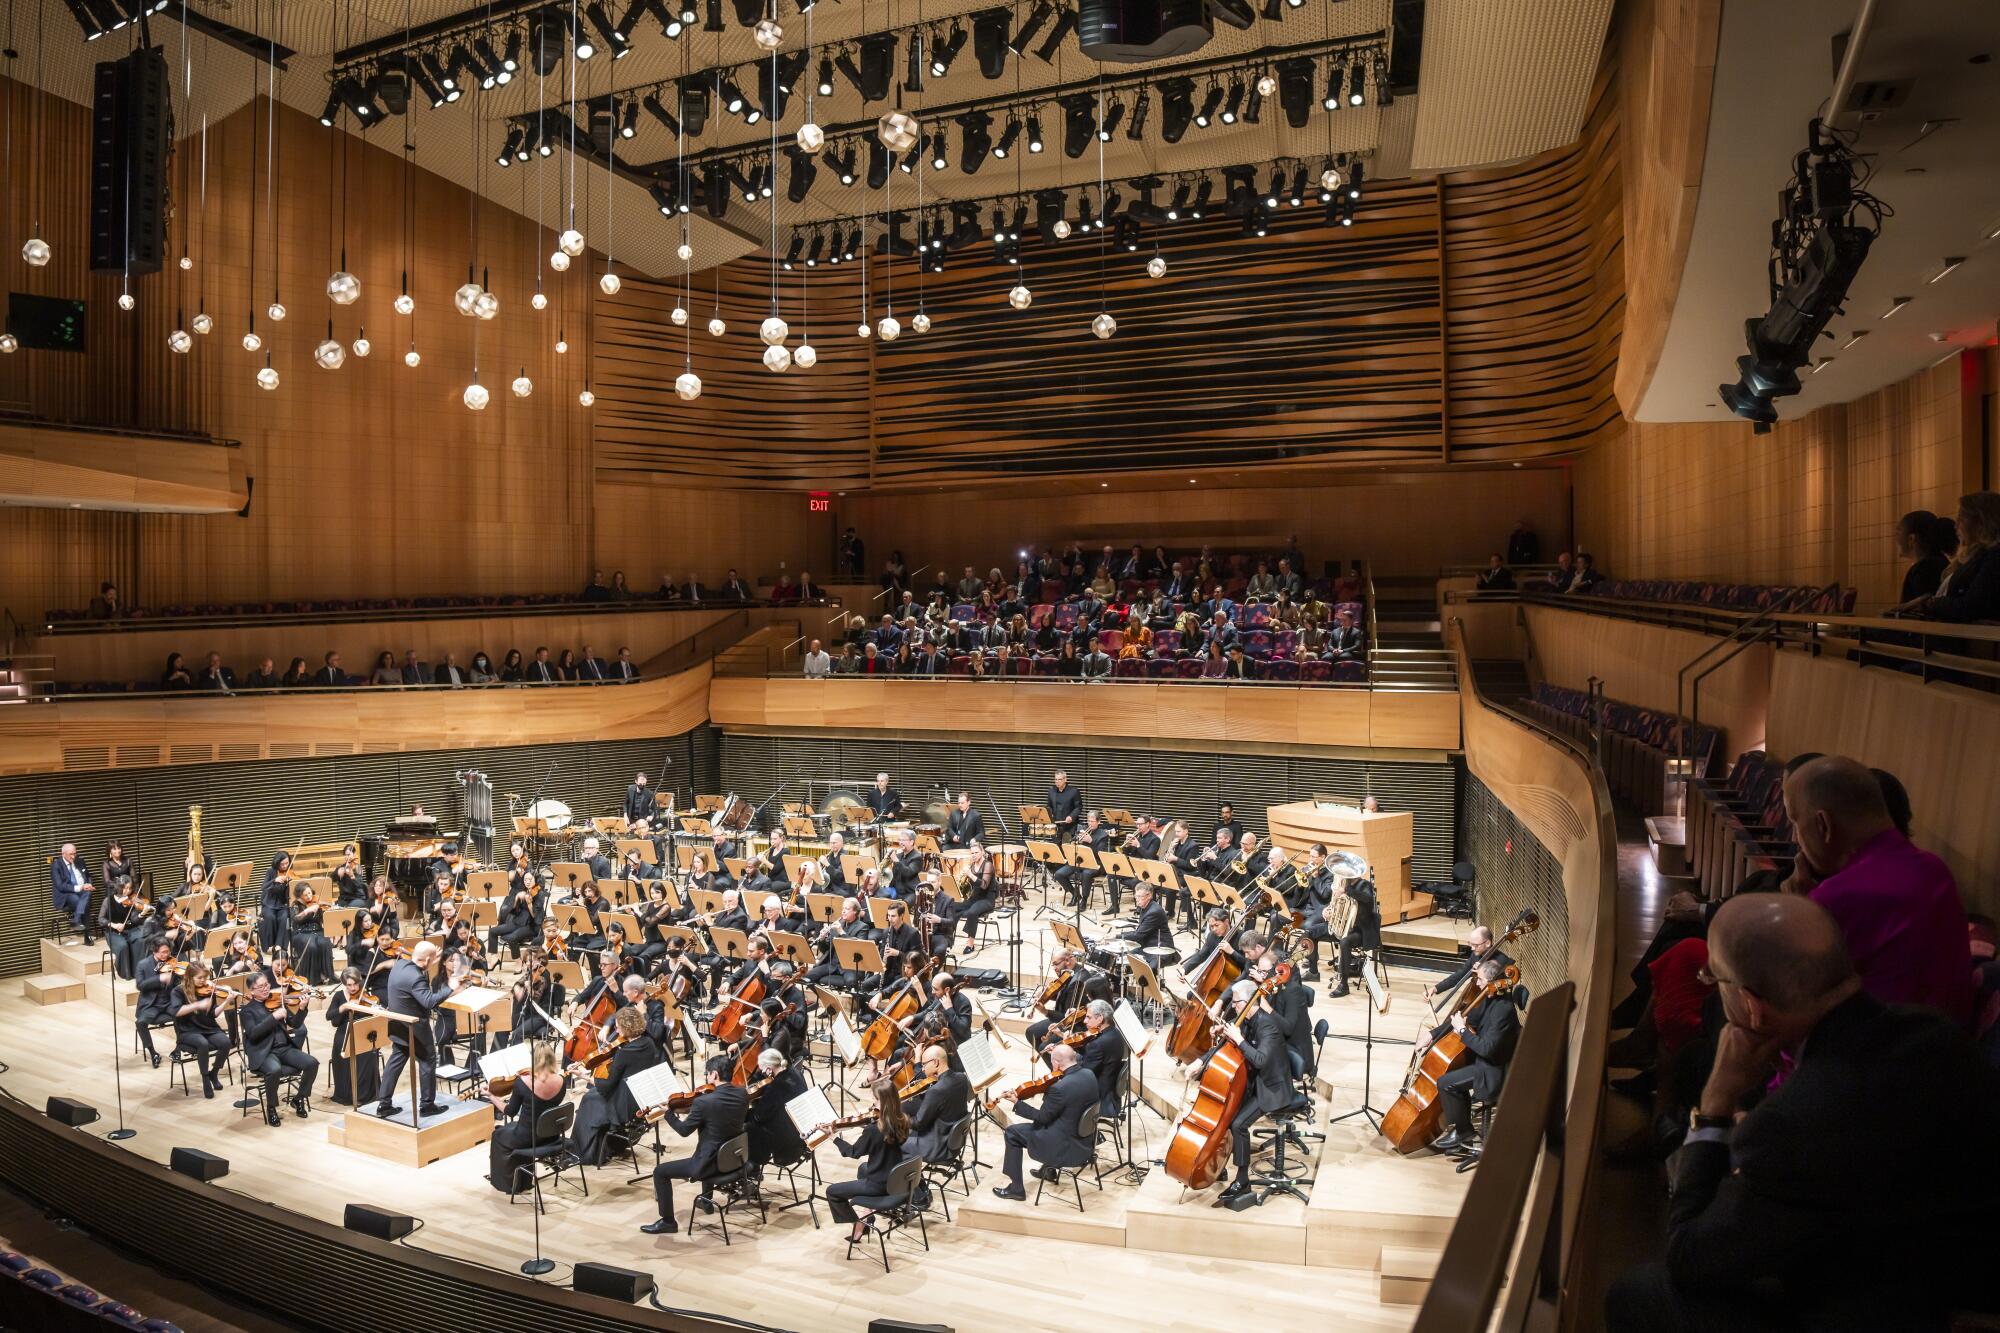 An audience is seen surrounding the wooden stage where the New York Philharmonic performs in a wooden concert hall.